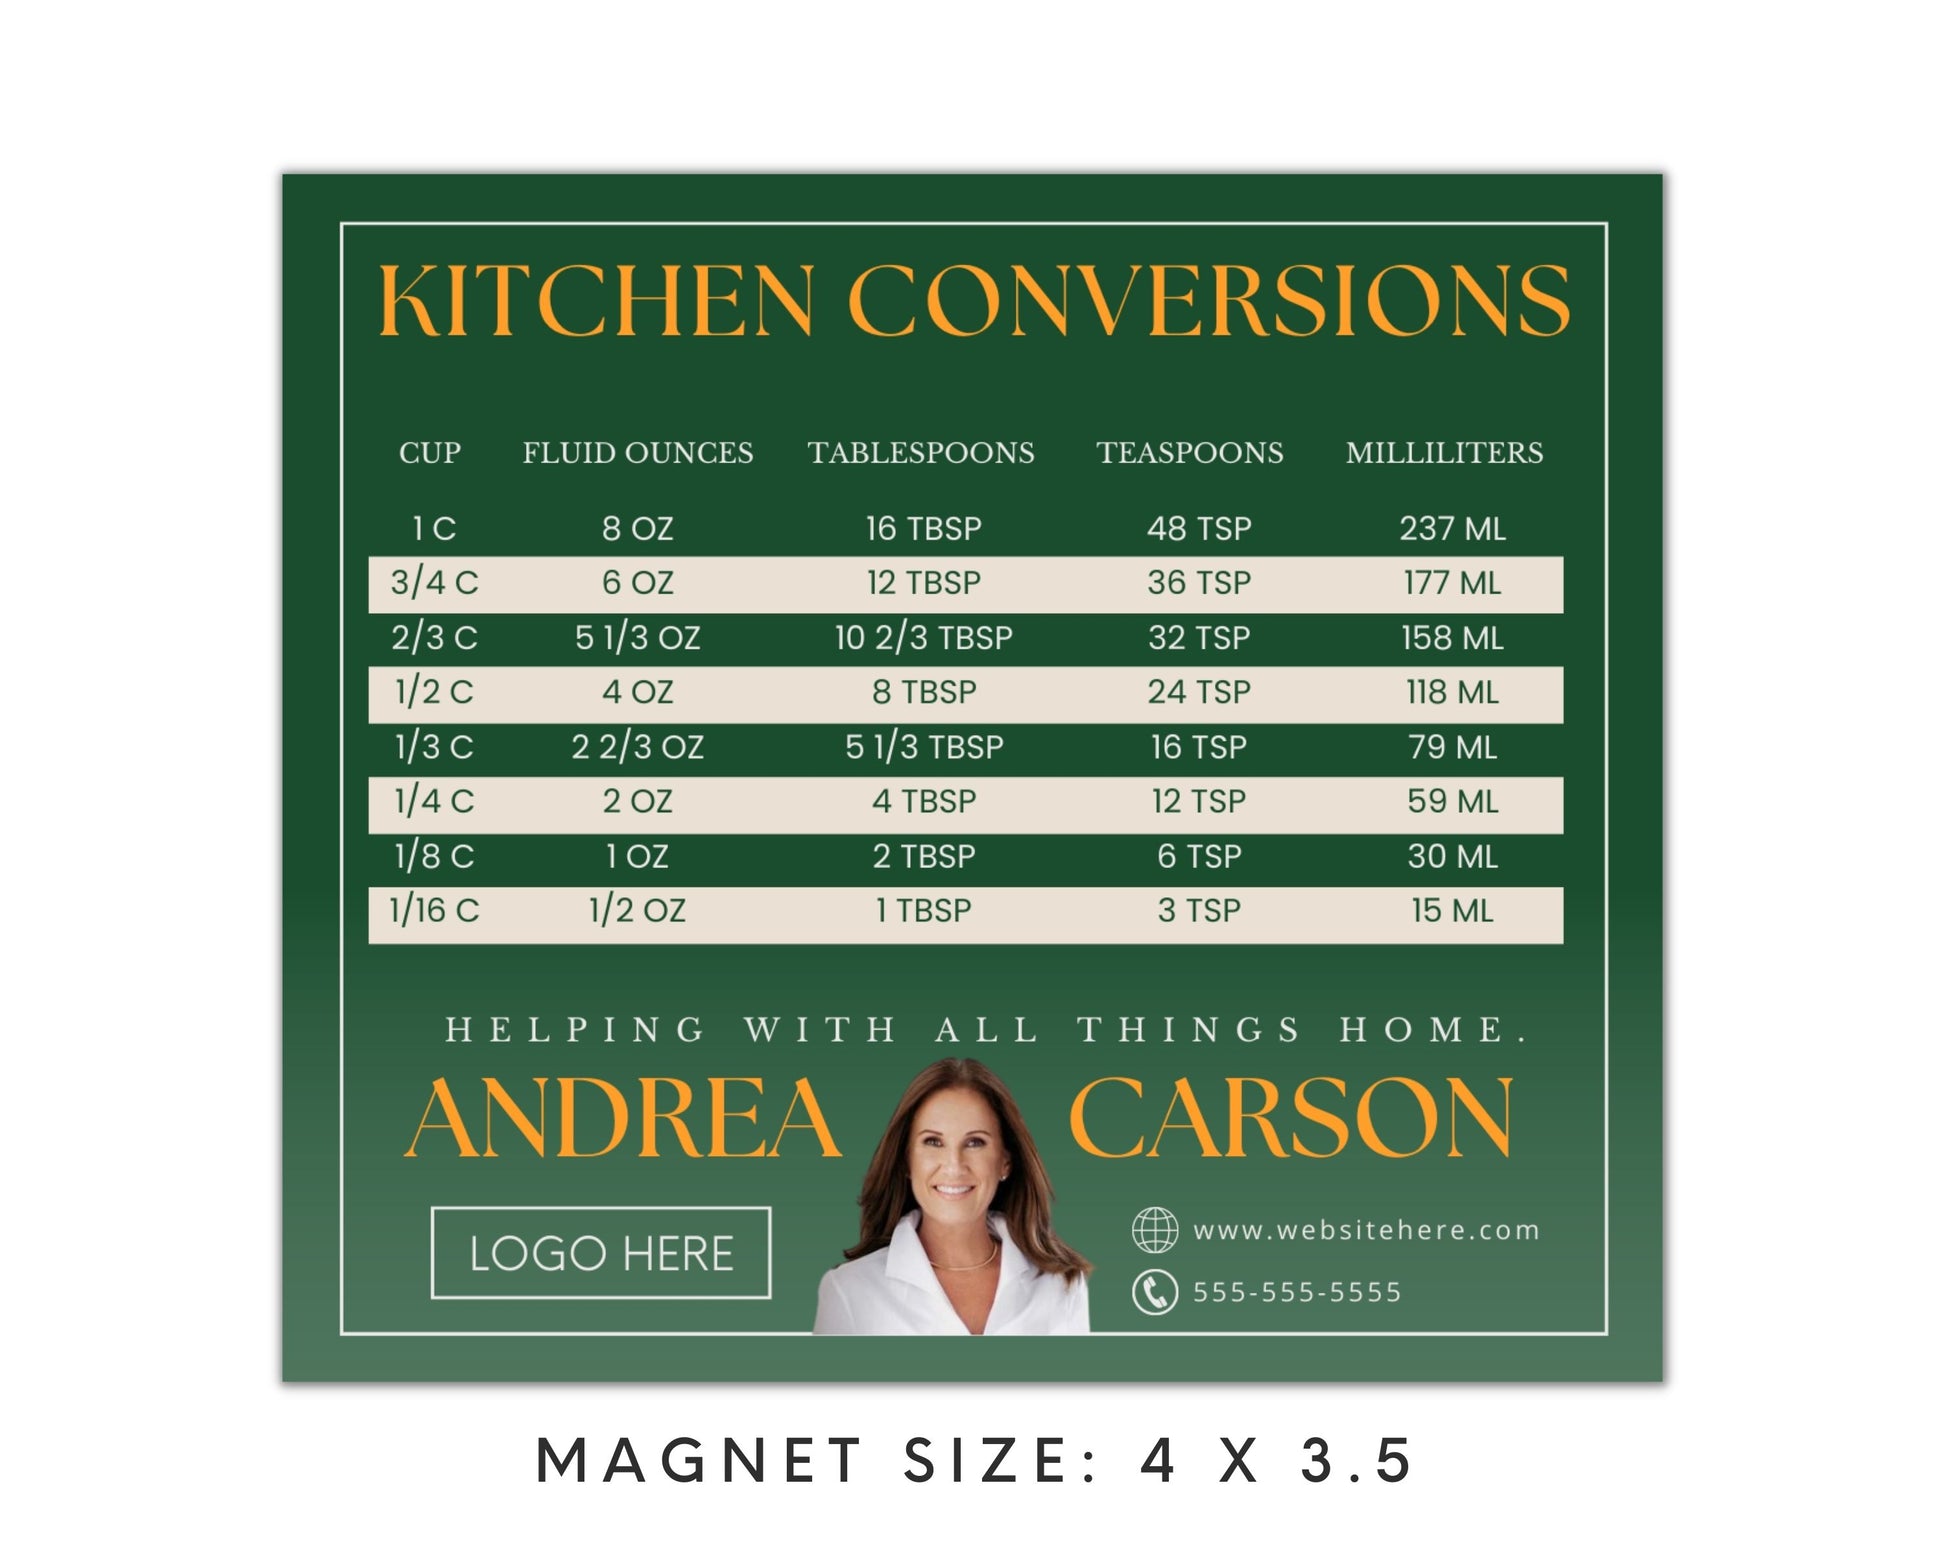 Real Estate Template – Promo Magnet with Kitchen Conversions 10